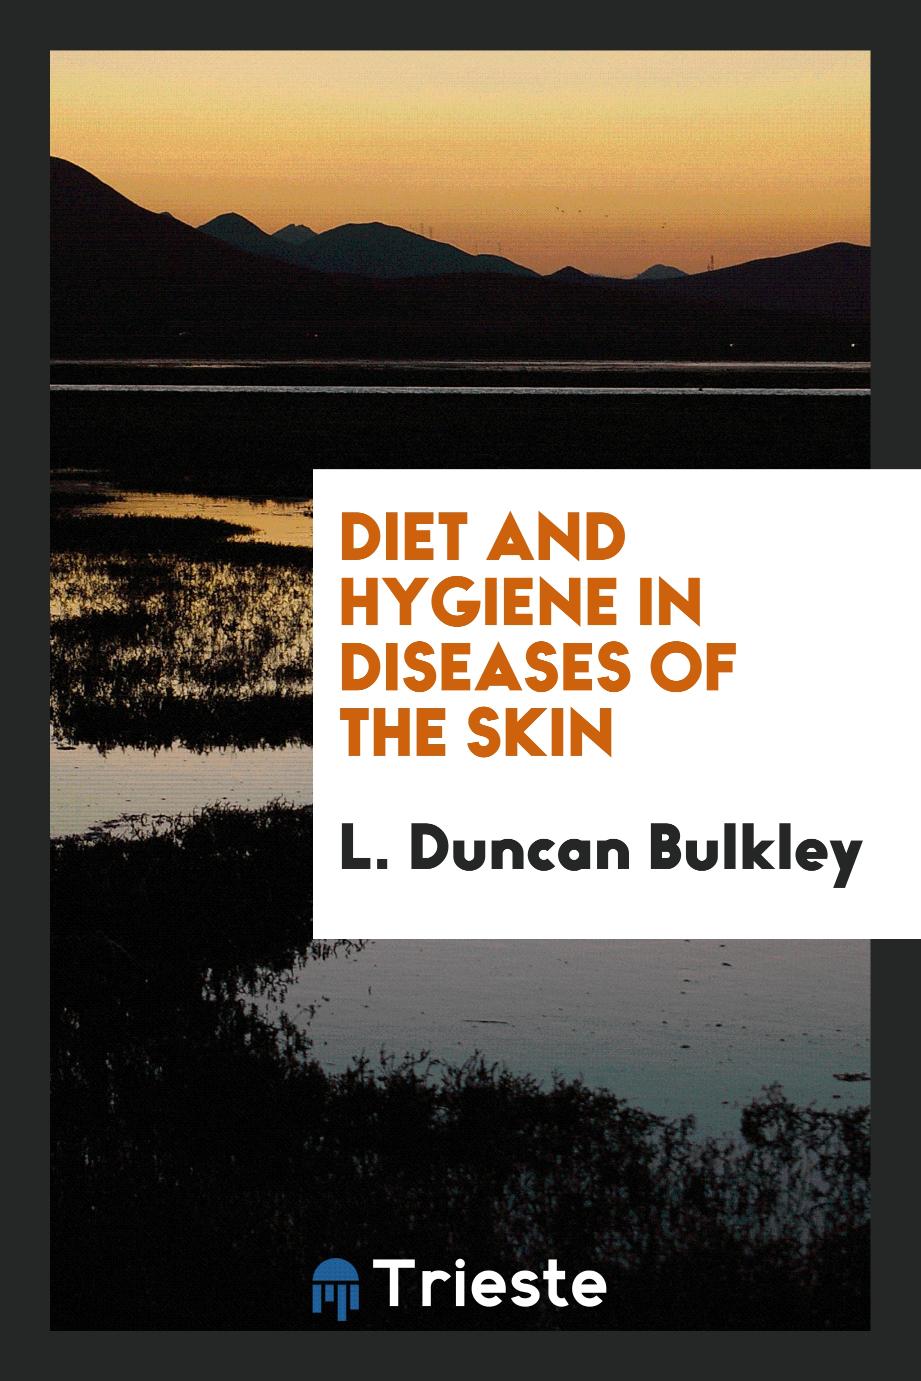 Diet and hygiene in diseases of the skin